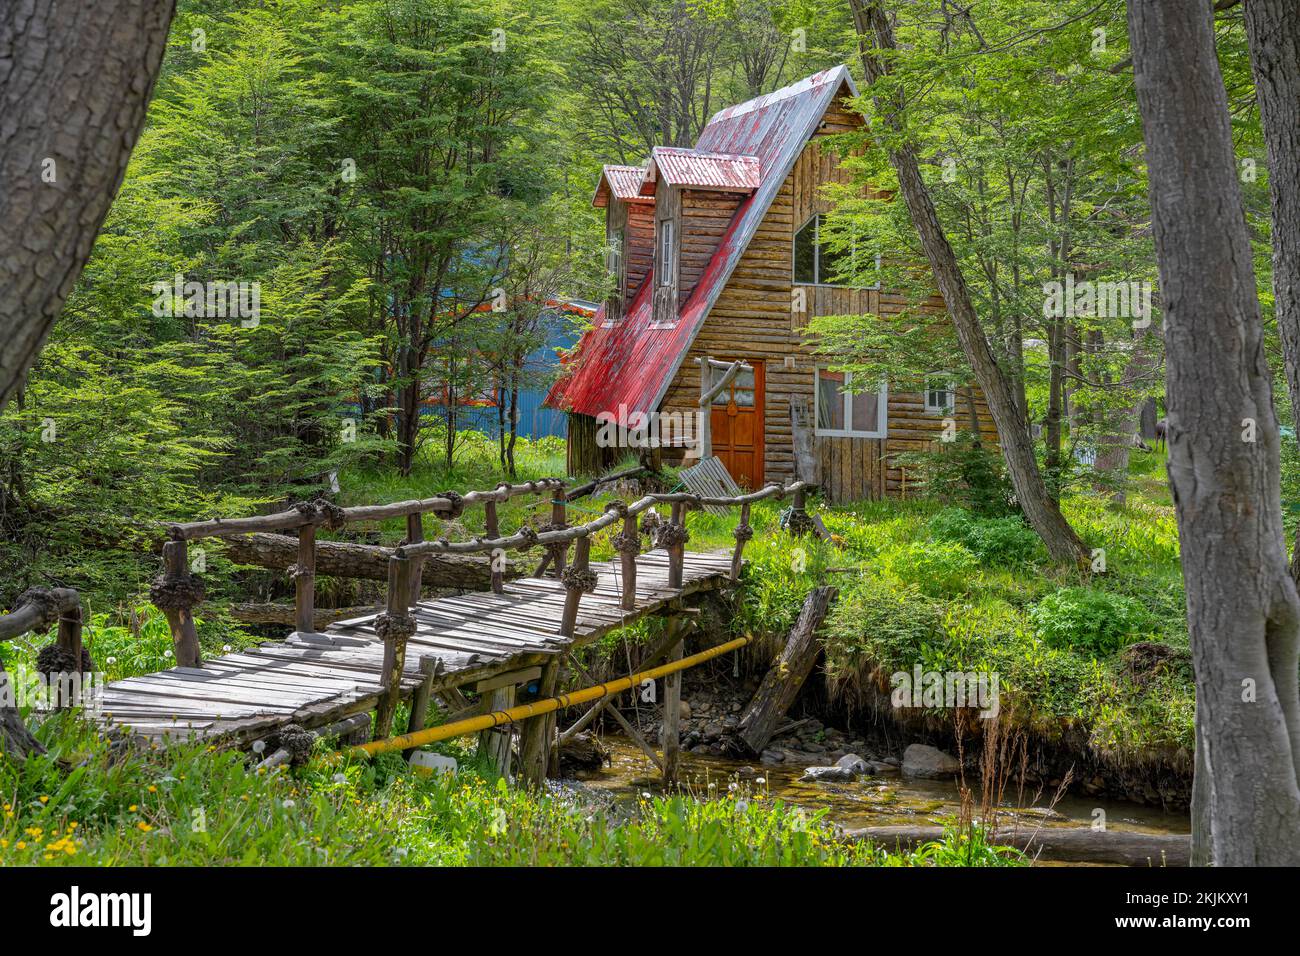 Wooden home in Ushuaia Argentina Stock Photo